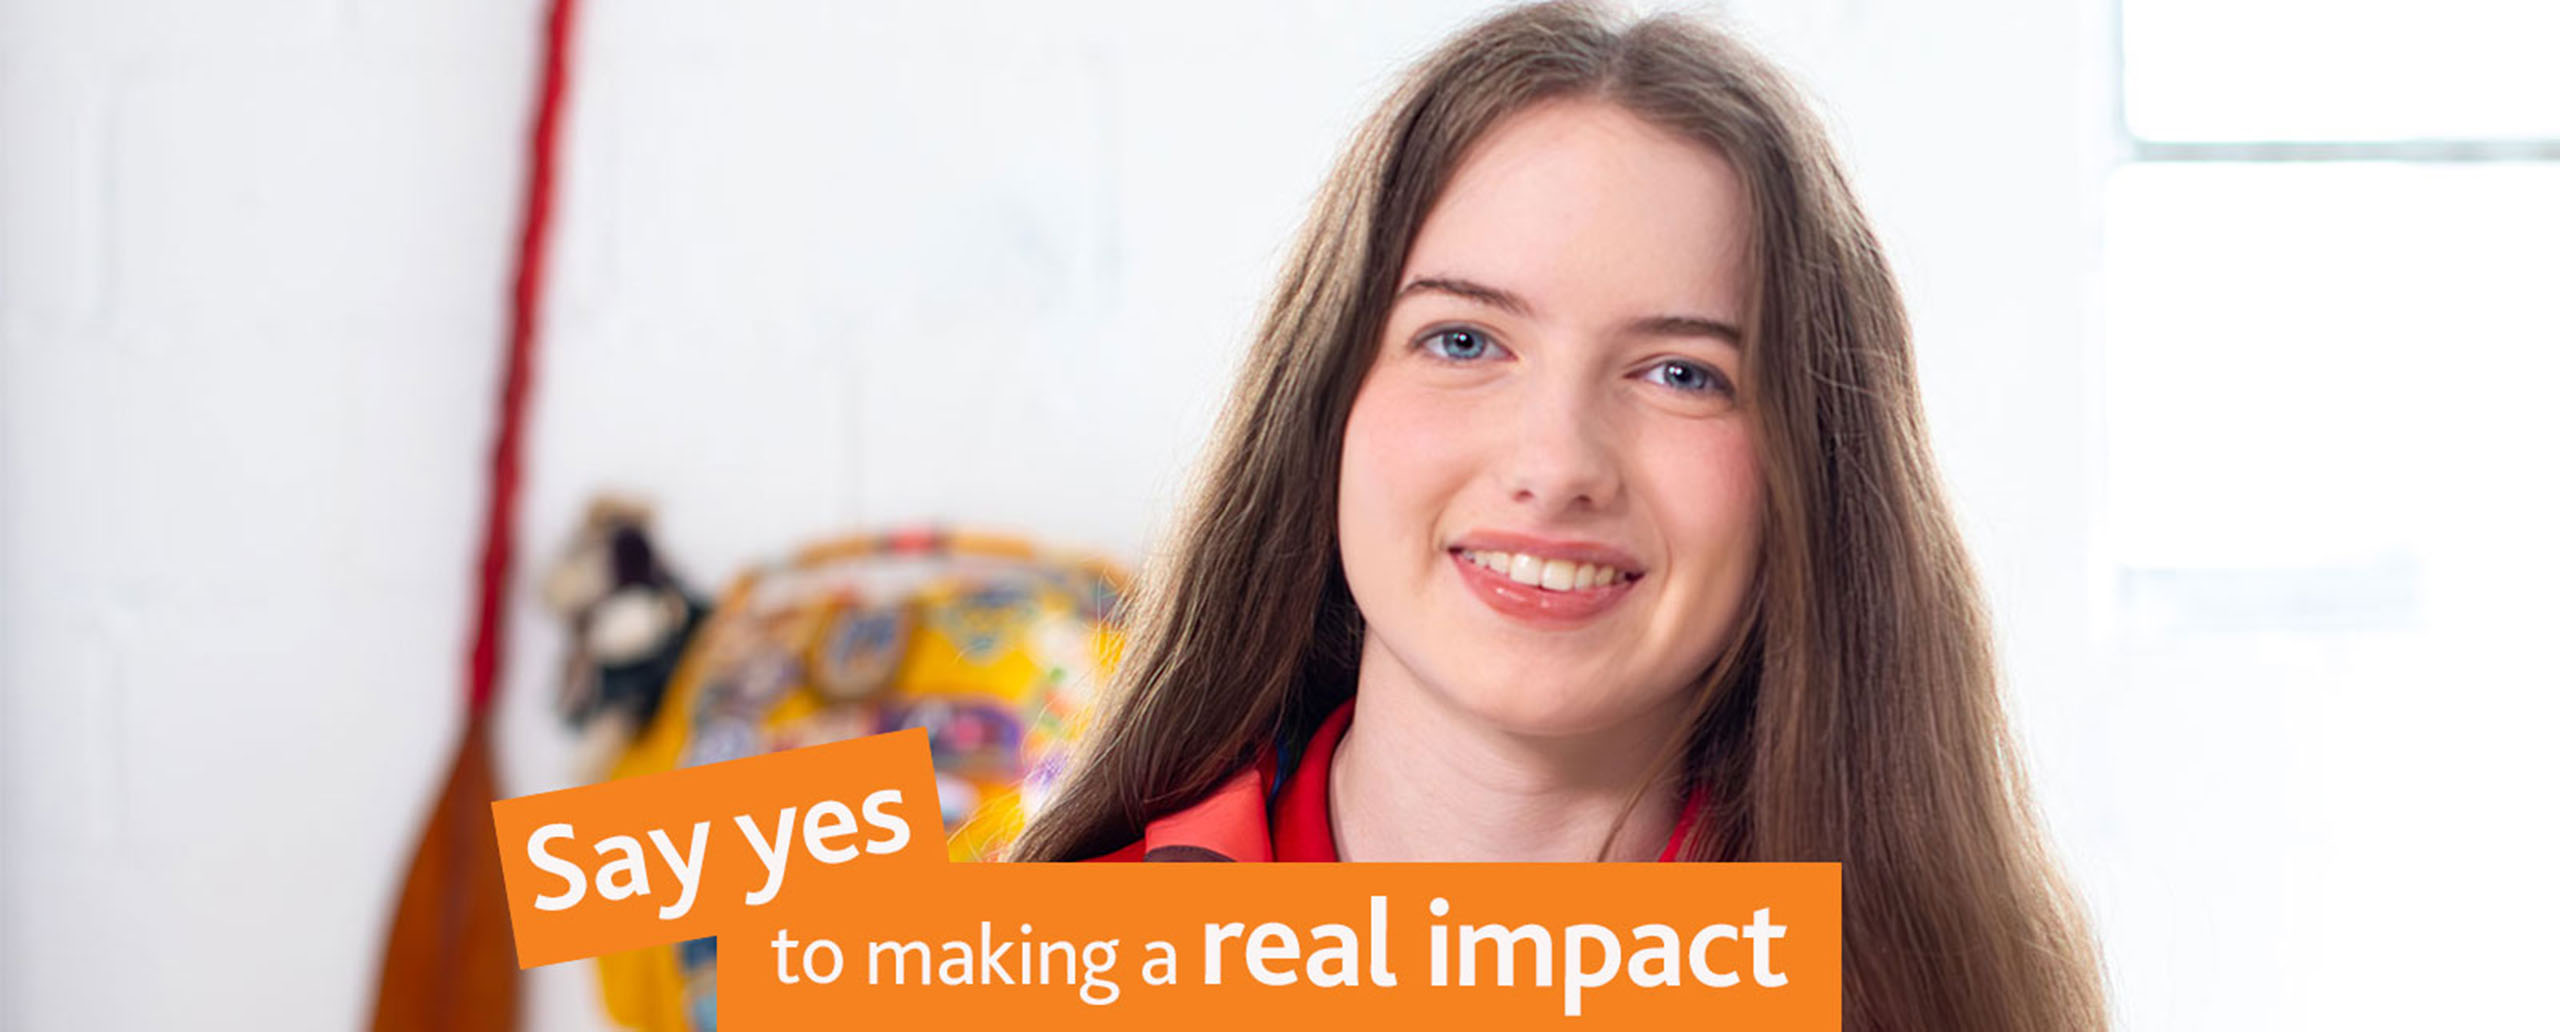 Say yes to making a real impact